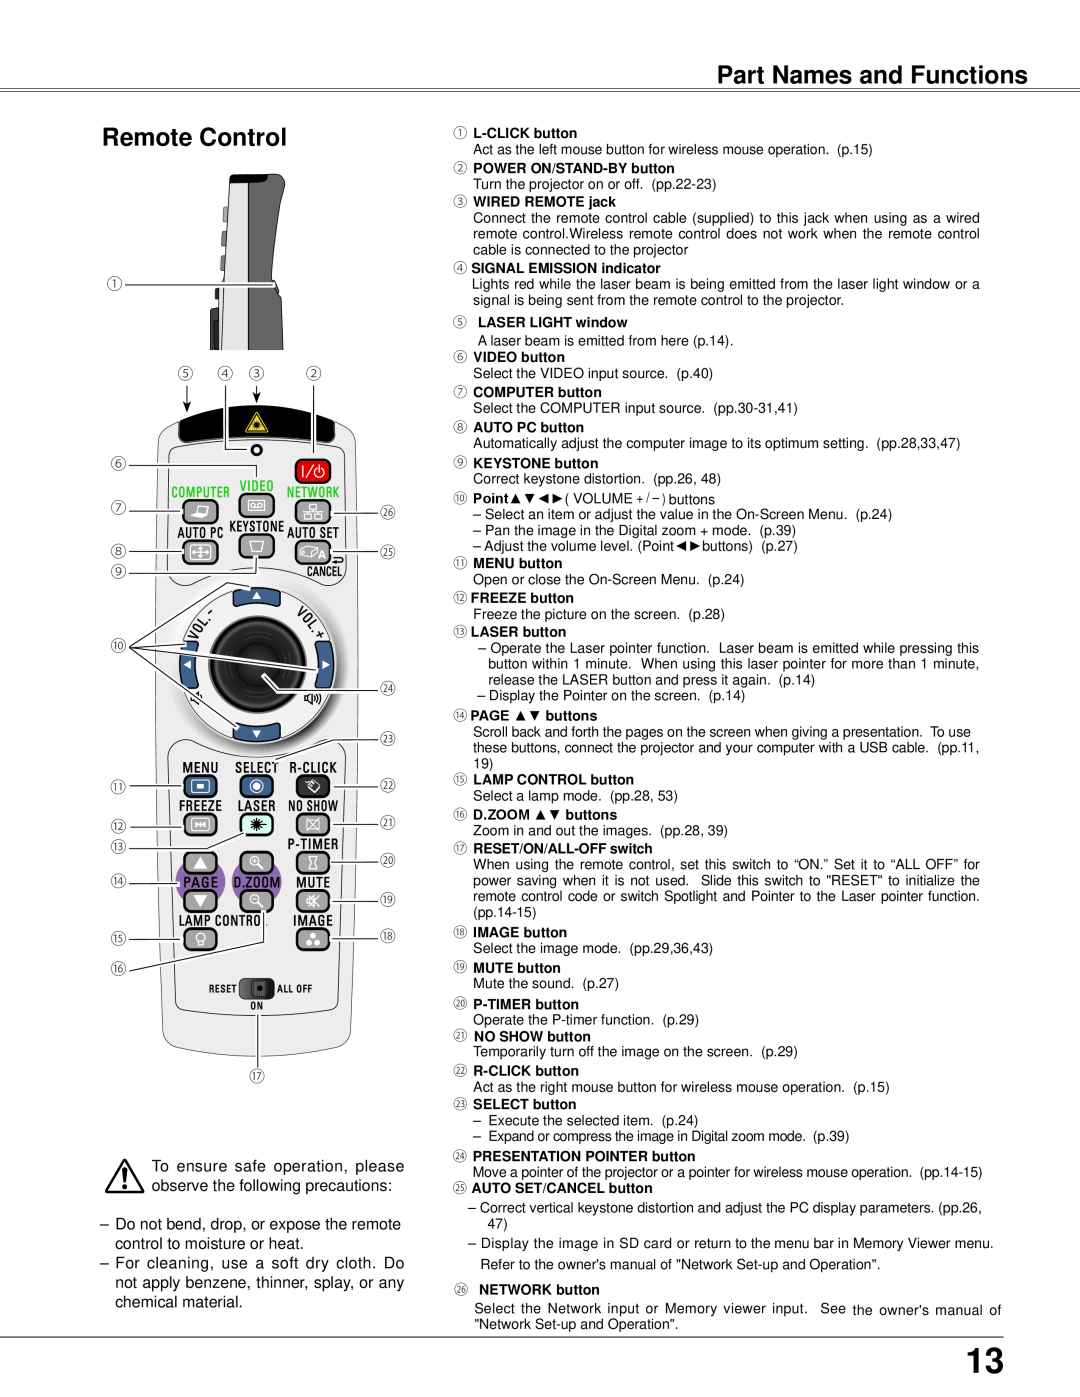 Eiki LC-XB42N Part Names and Functions Remote Control, To ensure safe operation, please observe the following precautions 